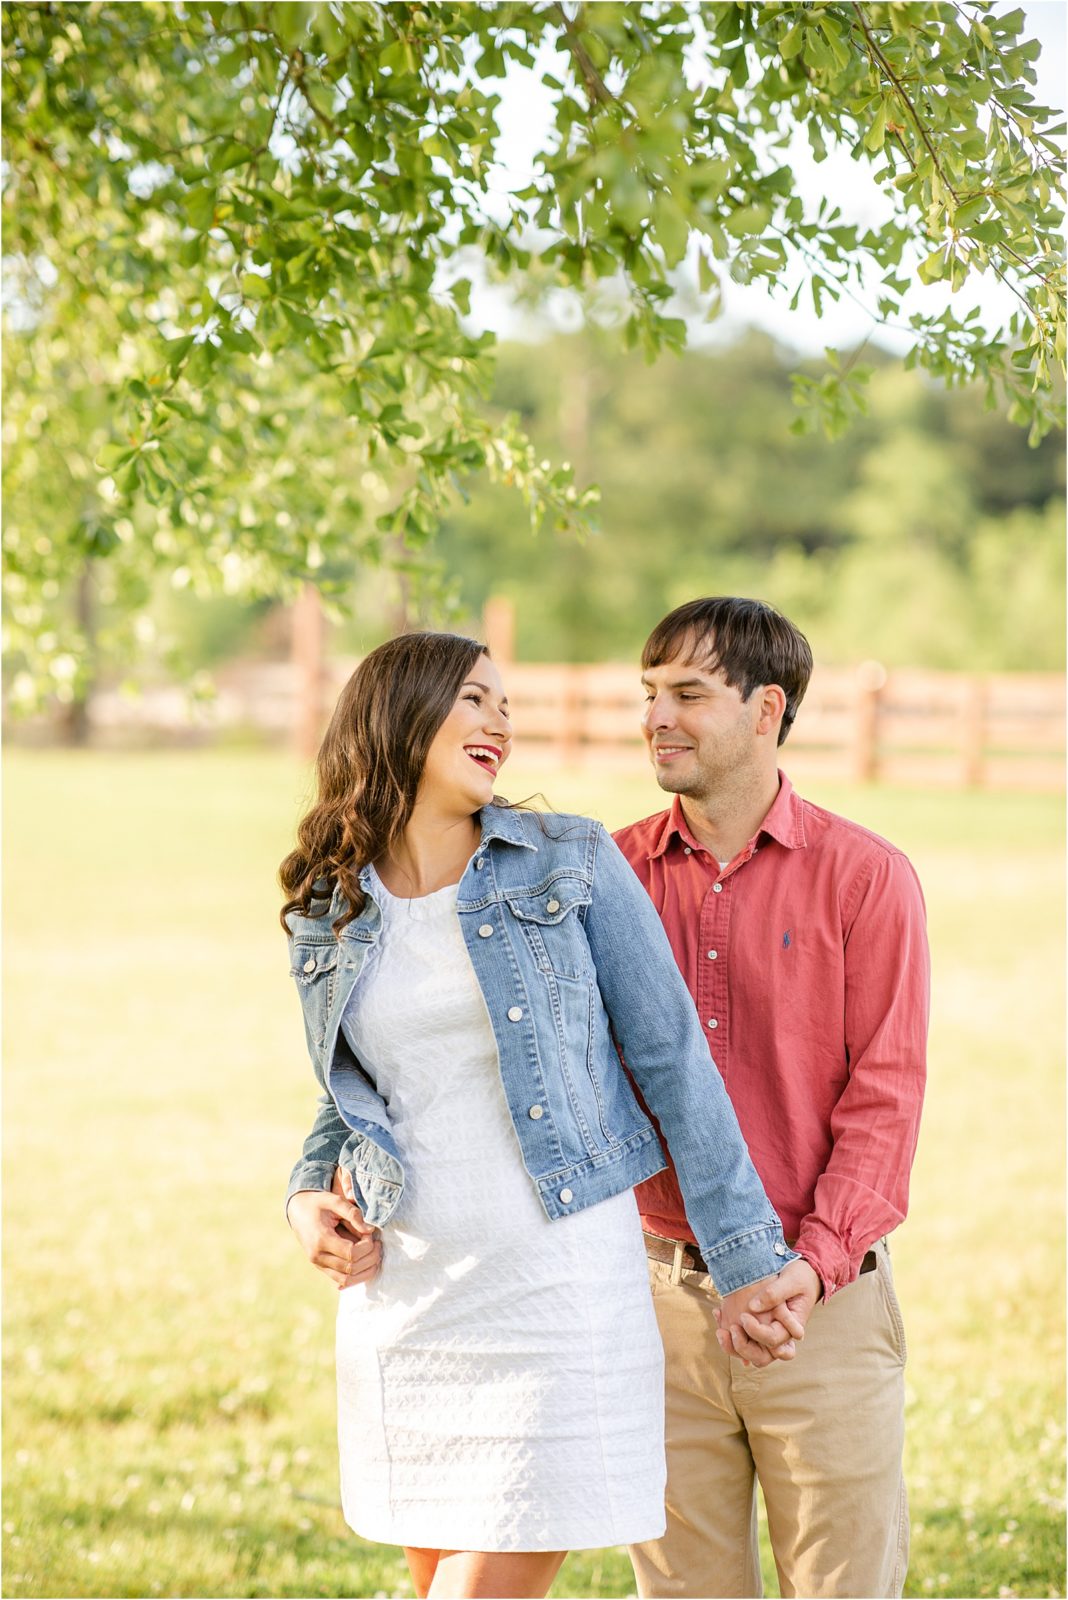 Engagement session in a field with laughing couple